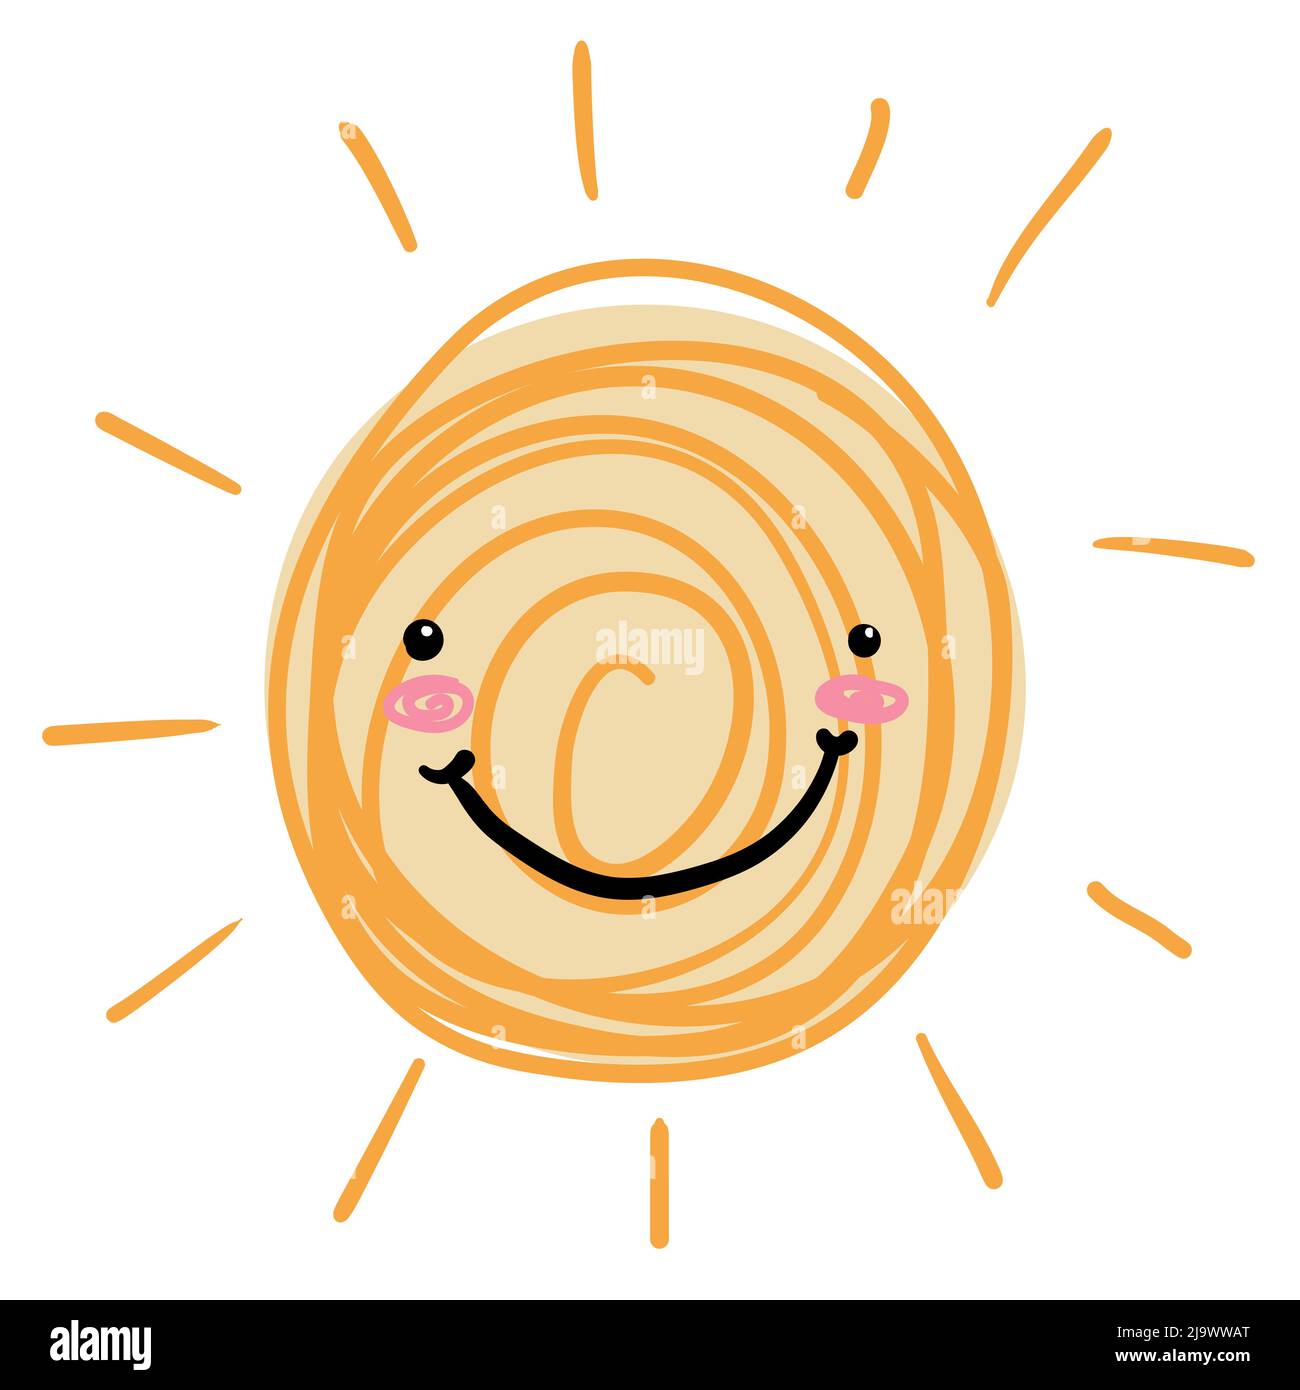 Childish doodle drawing of a smiling sun with blushed gesture. Stock Vector